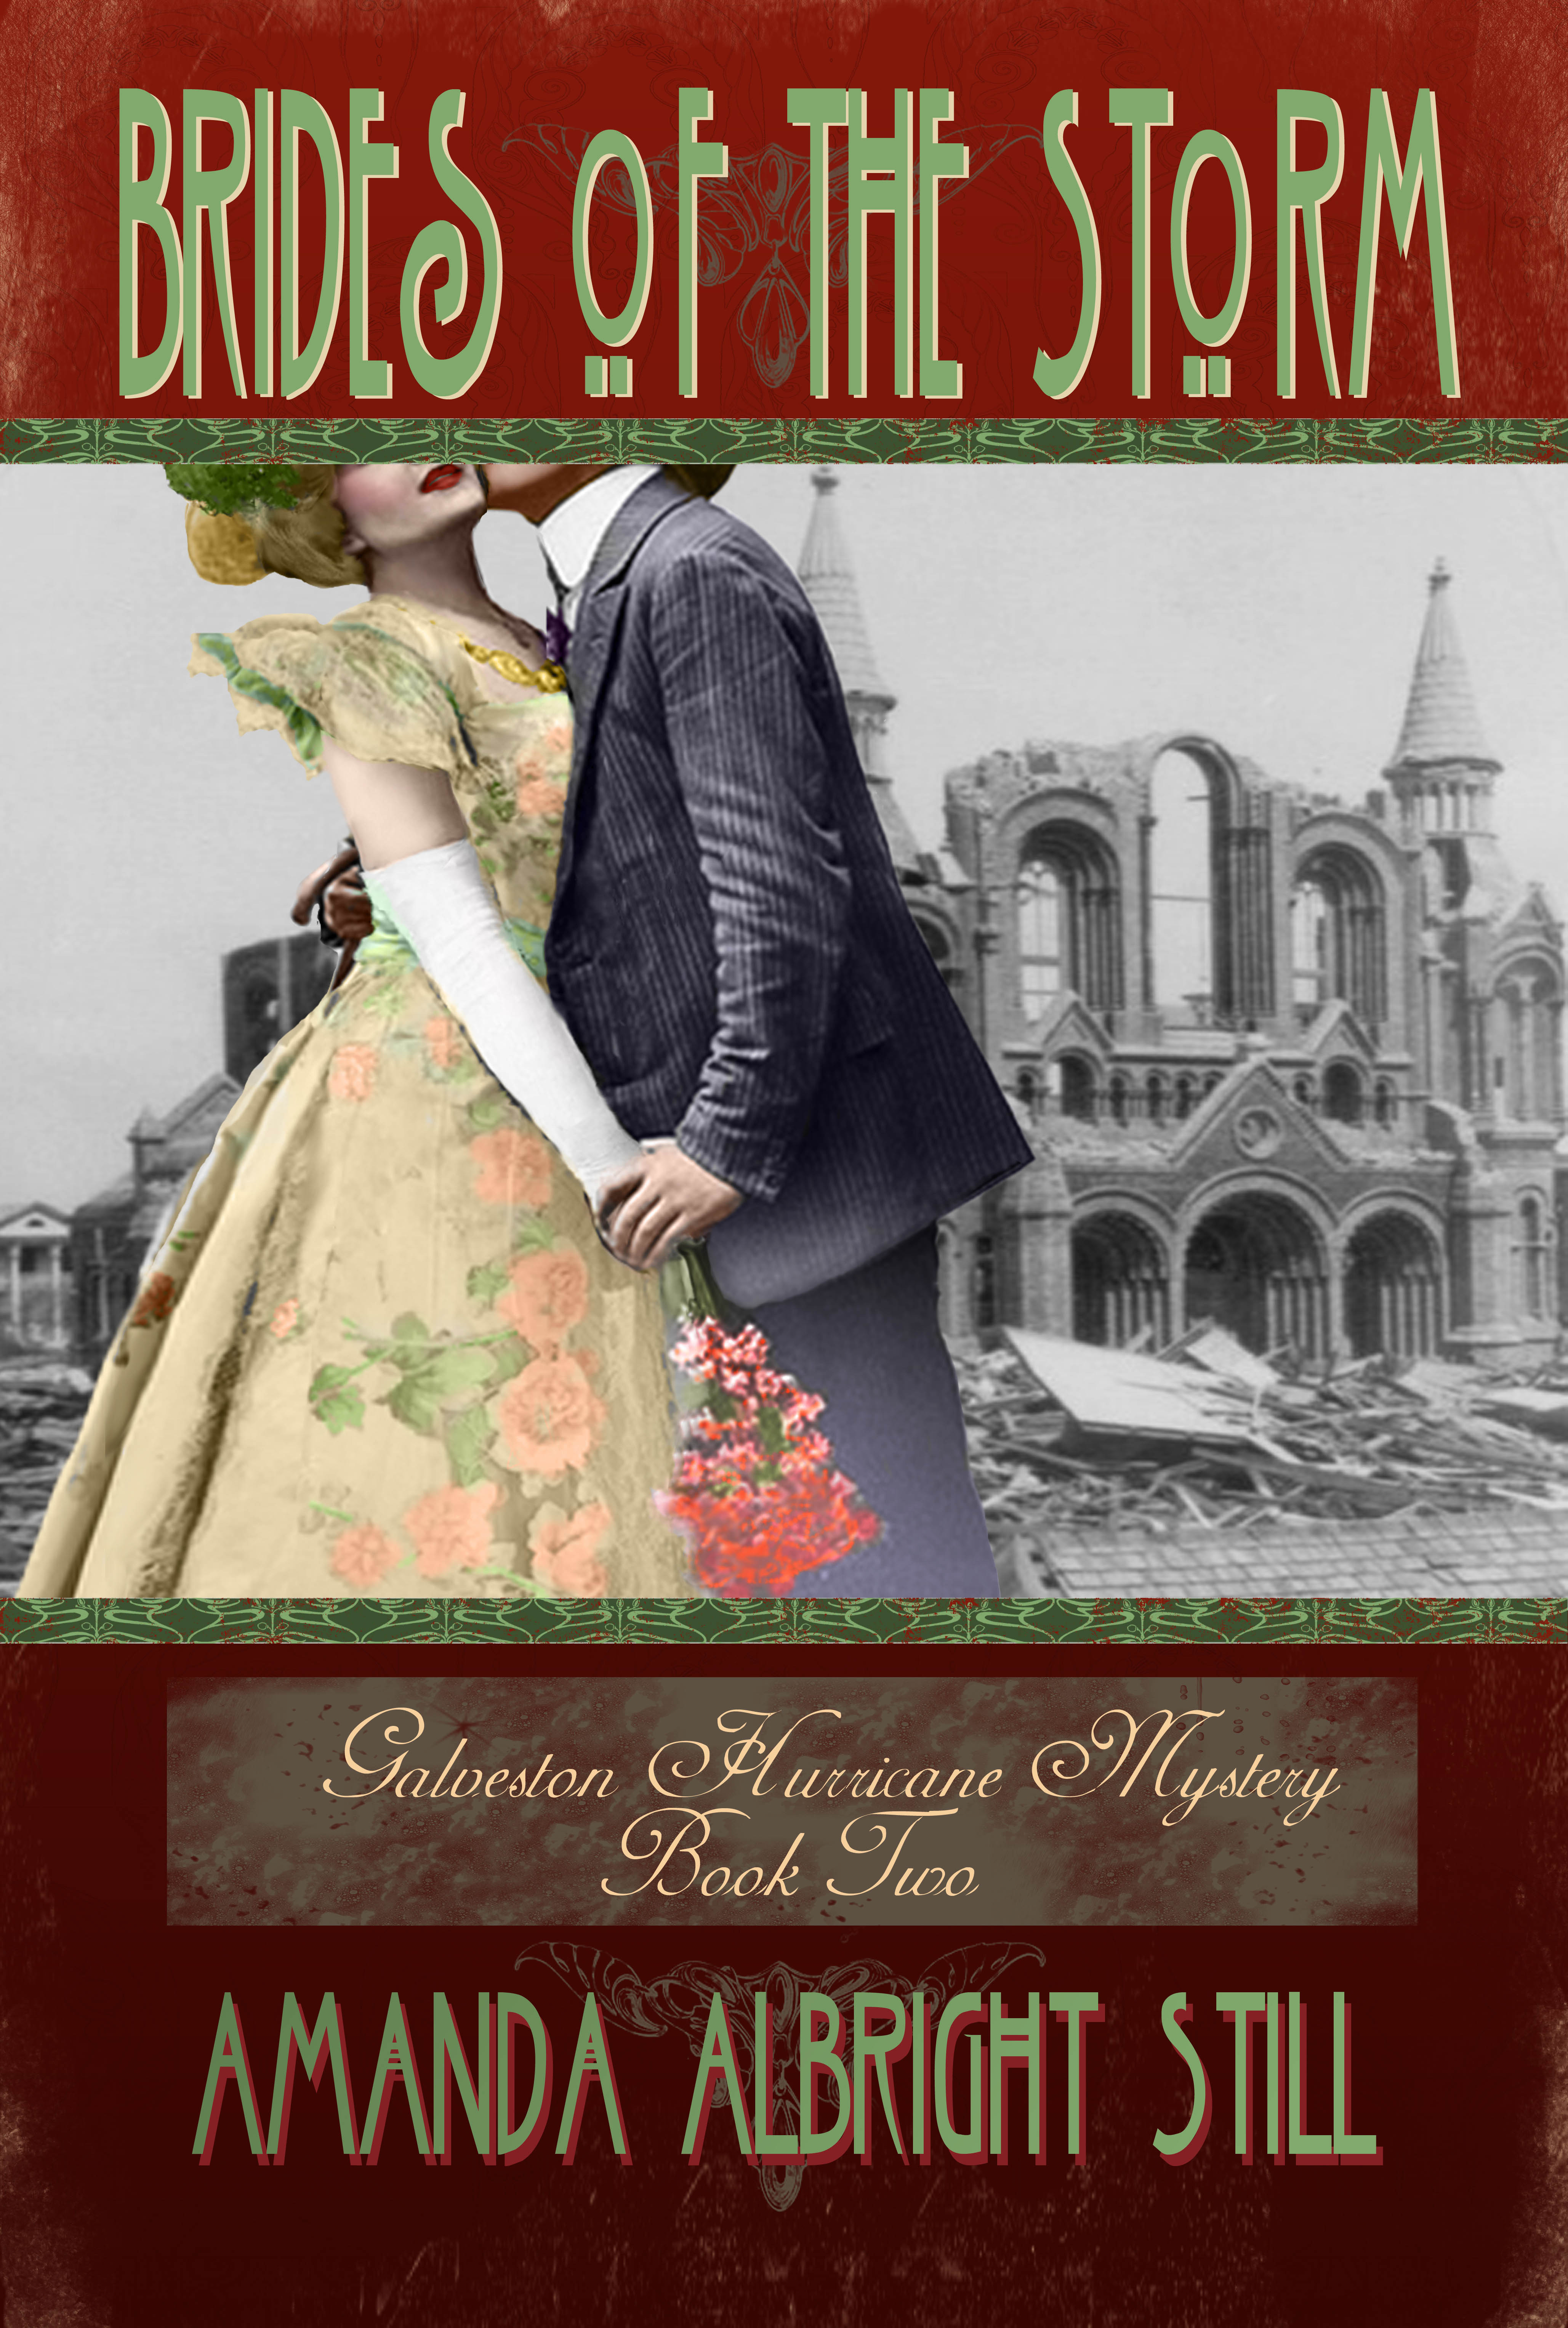 Brides of the Storm, Book 2 of the Galveston Hurricane Mystery Series.